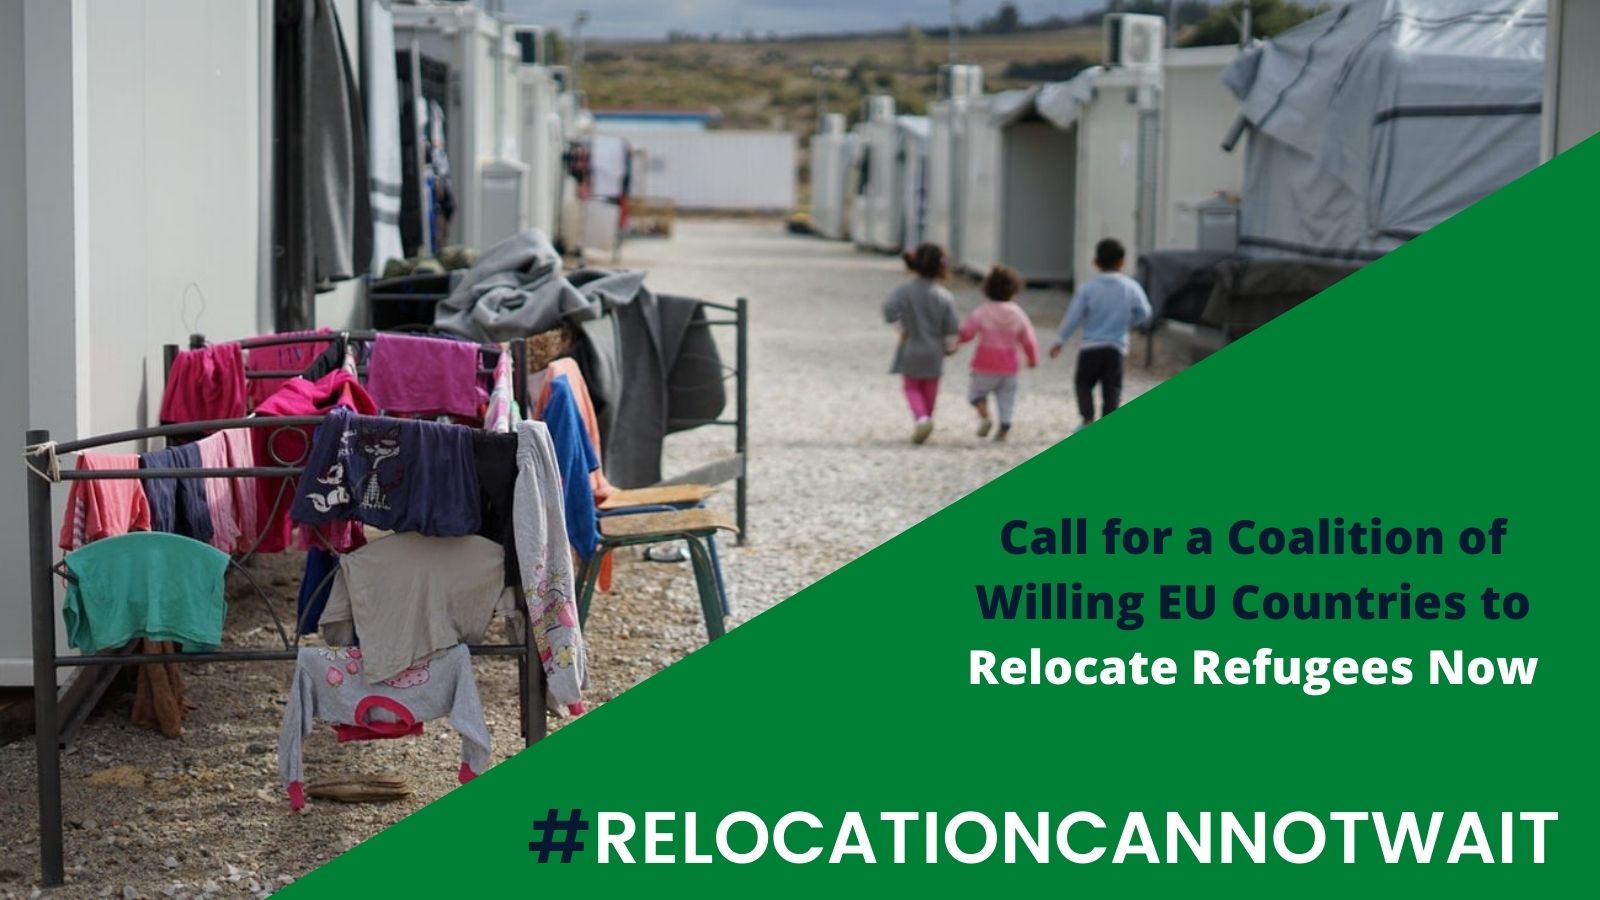 Call for a Coalition of Willing EU Countries to Relocate Refugees Now On the occasion of the European Council meeting on 24 25 June